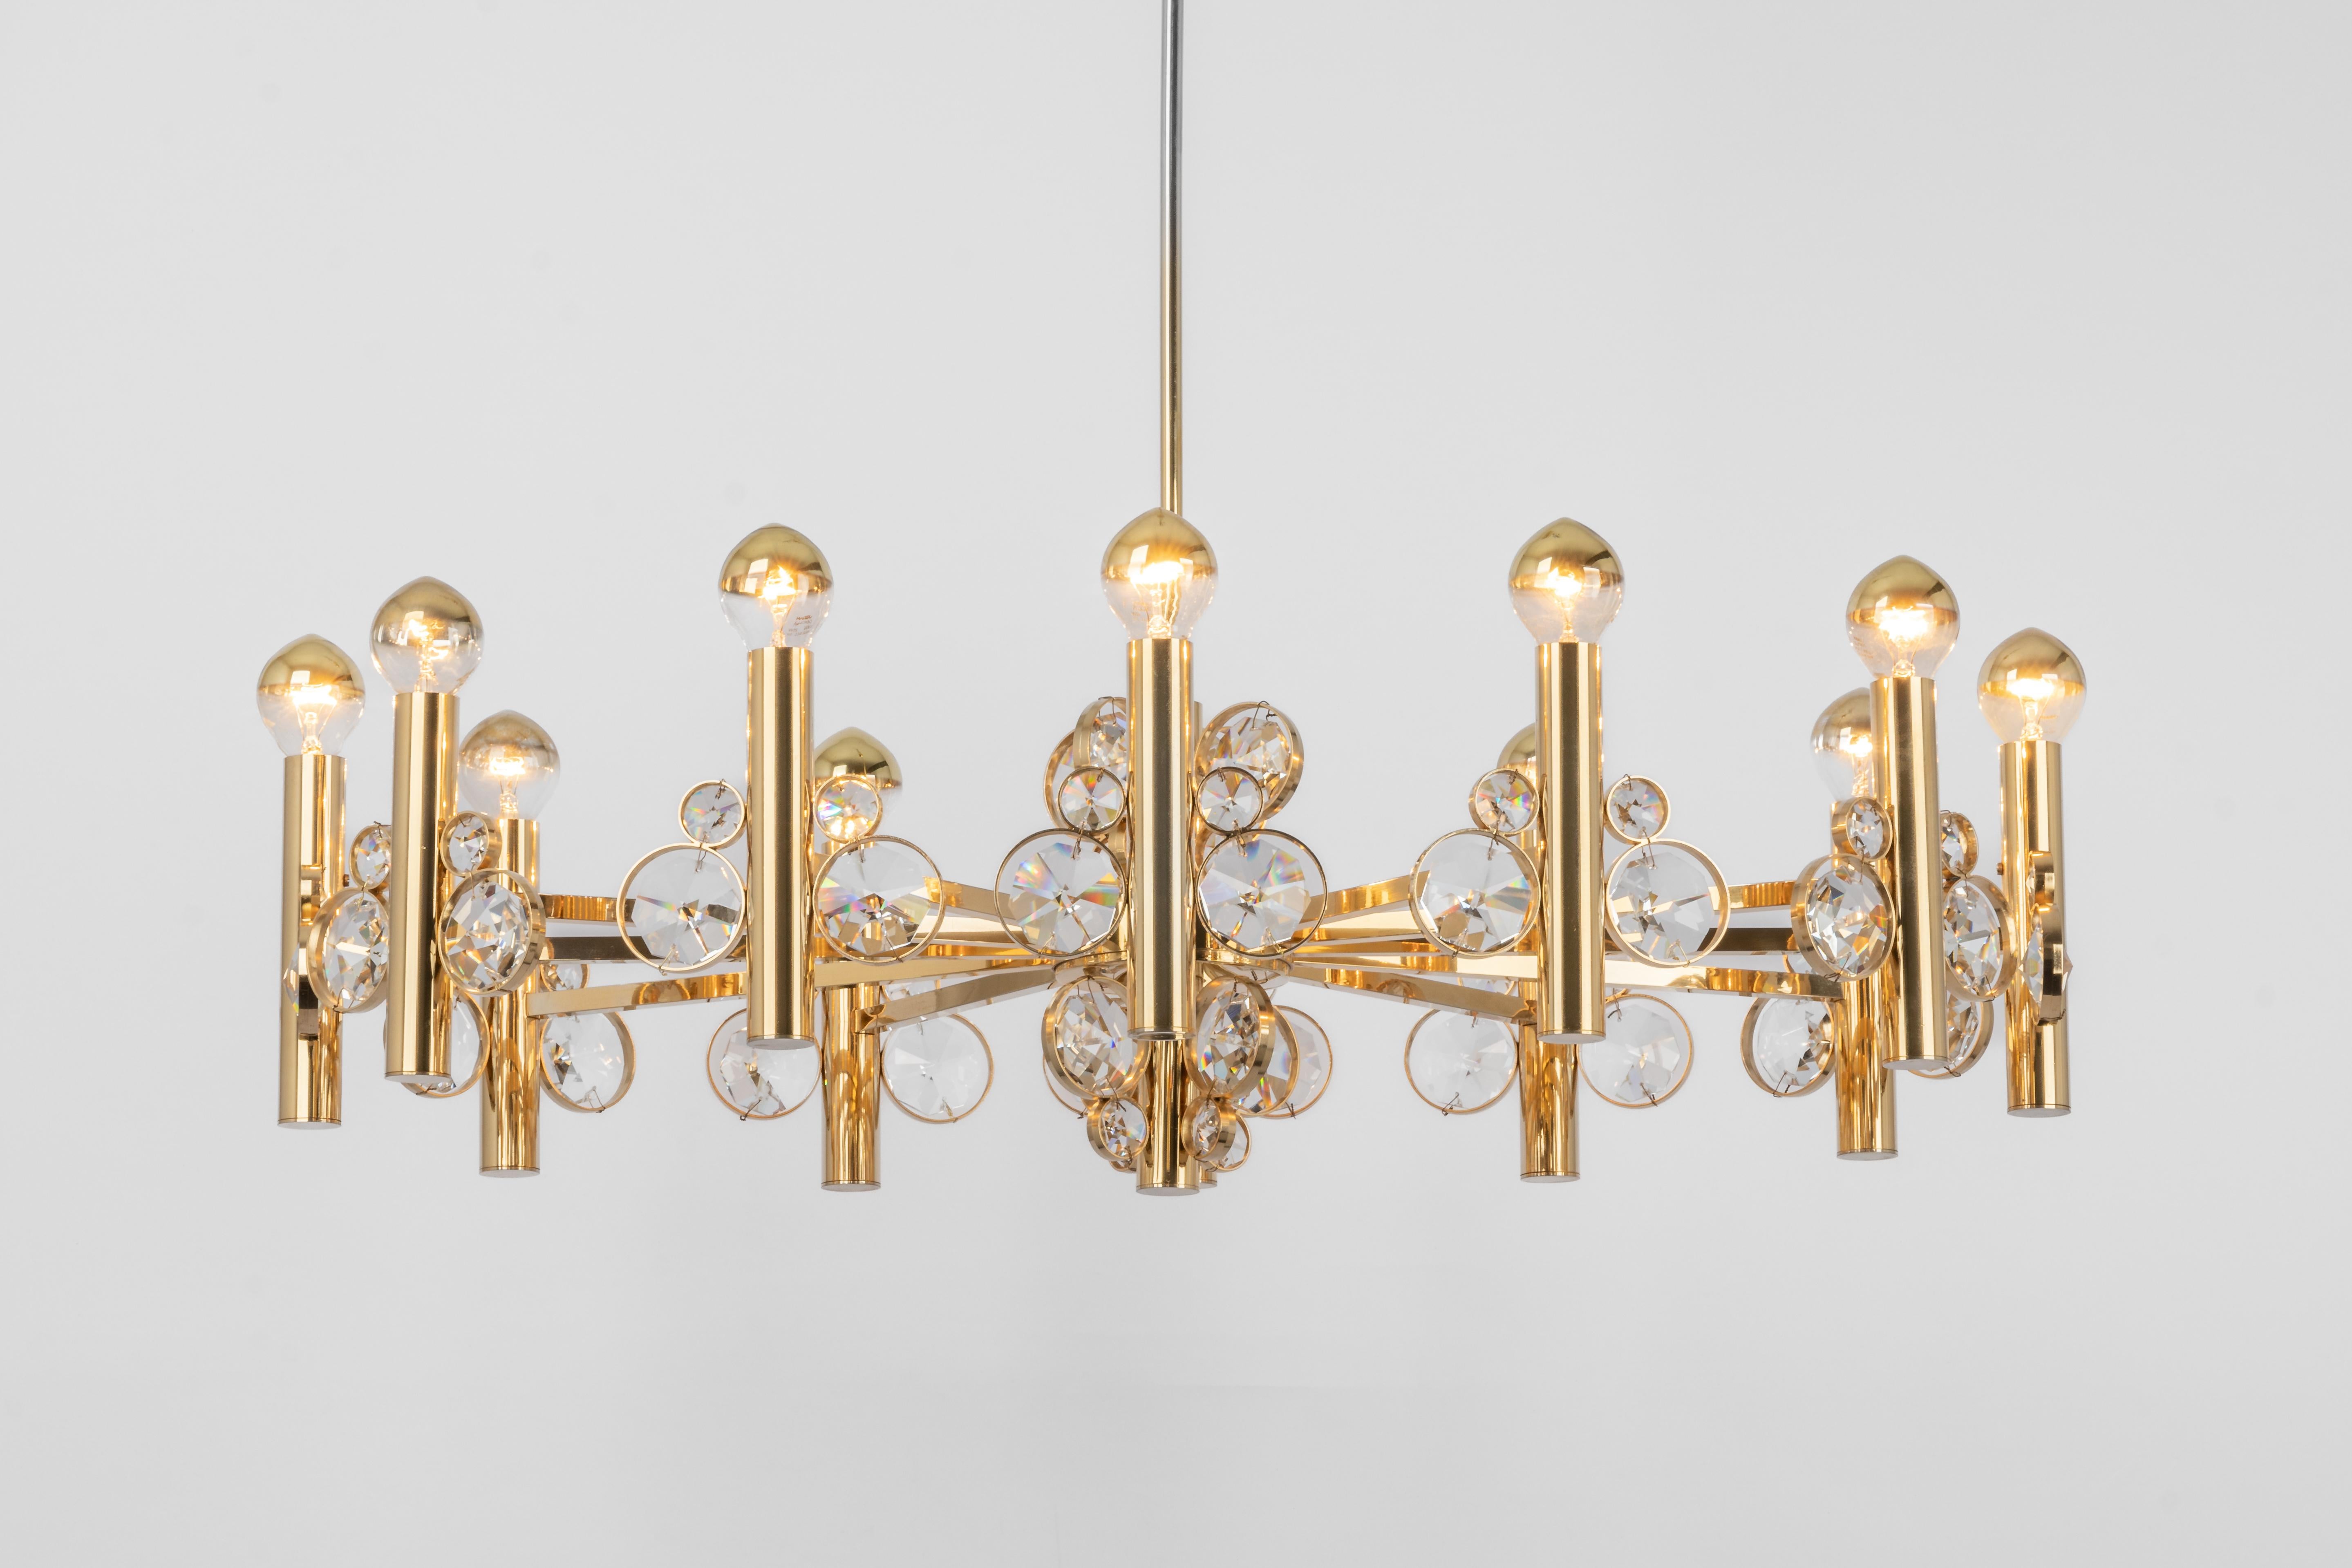 A wonderful and high-quality gilded chandelier by Palwa -Design Sciolari, Germany, 1970s.
It is made of a 24-carat gold-plated brass frame decorated with individual 